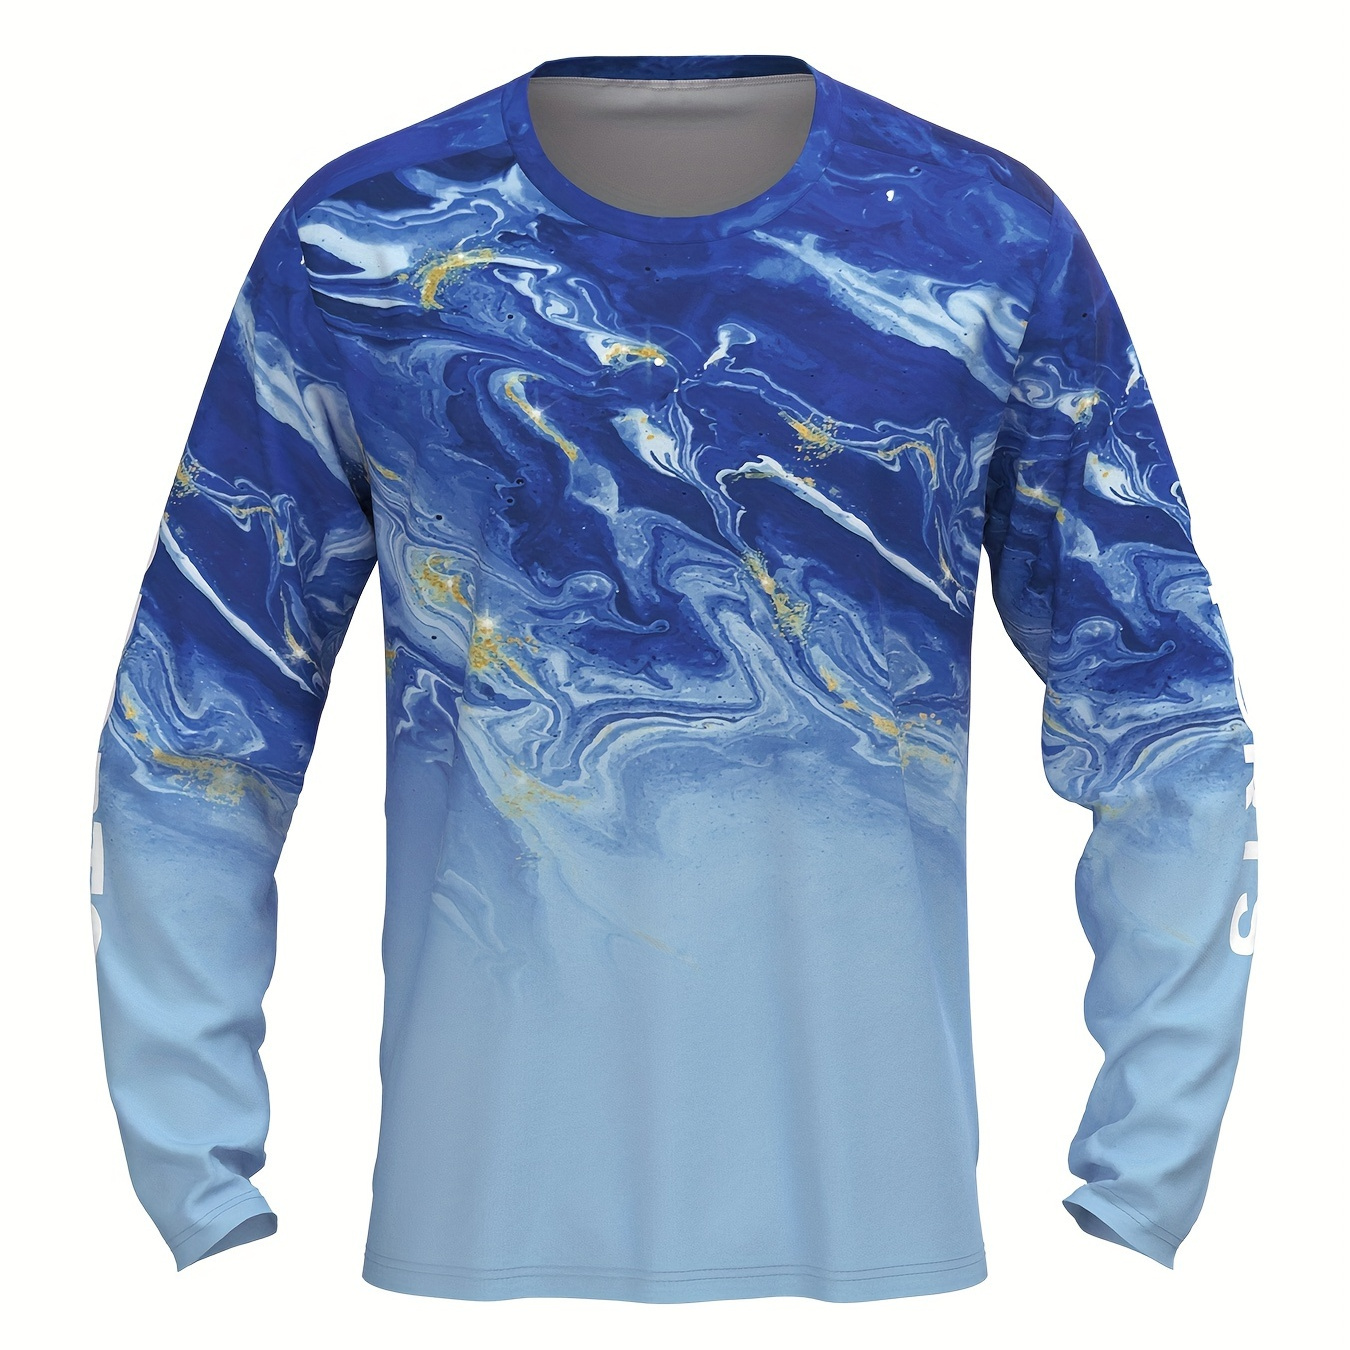 

Men's Sea Graphic Print Sun Protection Shirt, Quick Dry Long Sleeve Crew Neck Rash Guard For Fishing Hiking Outdoor